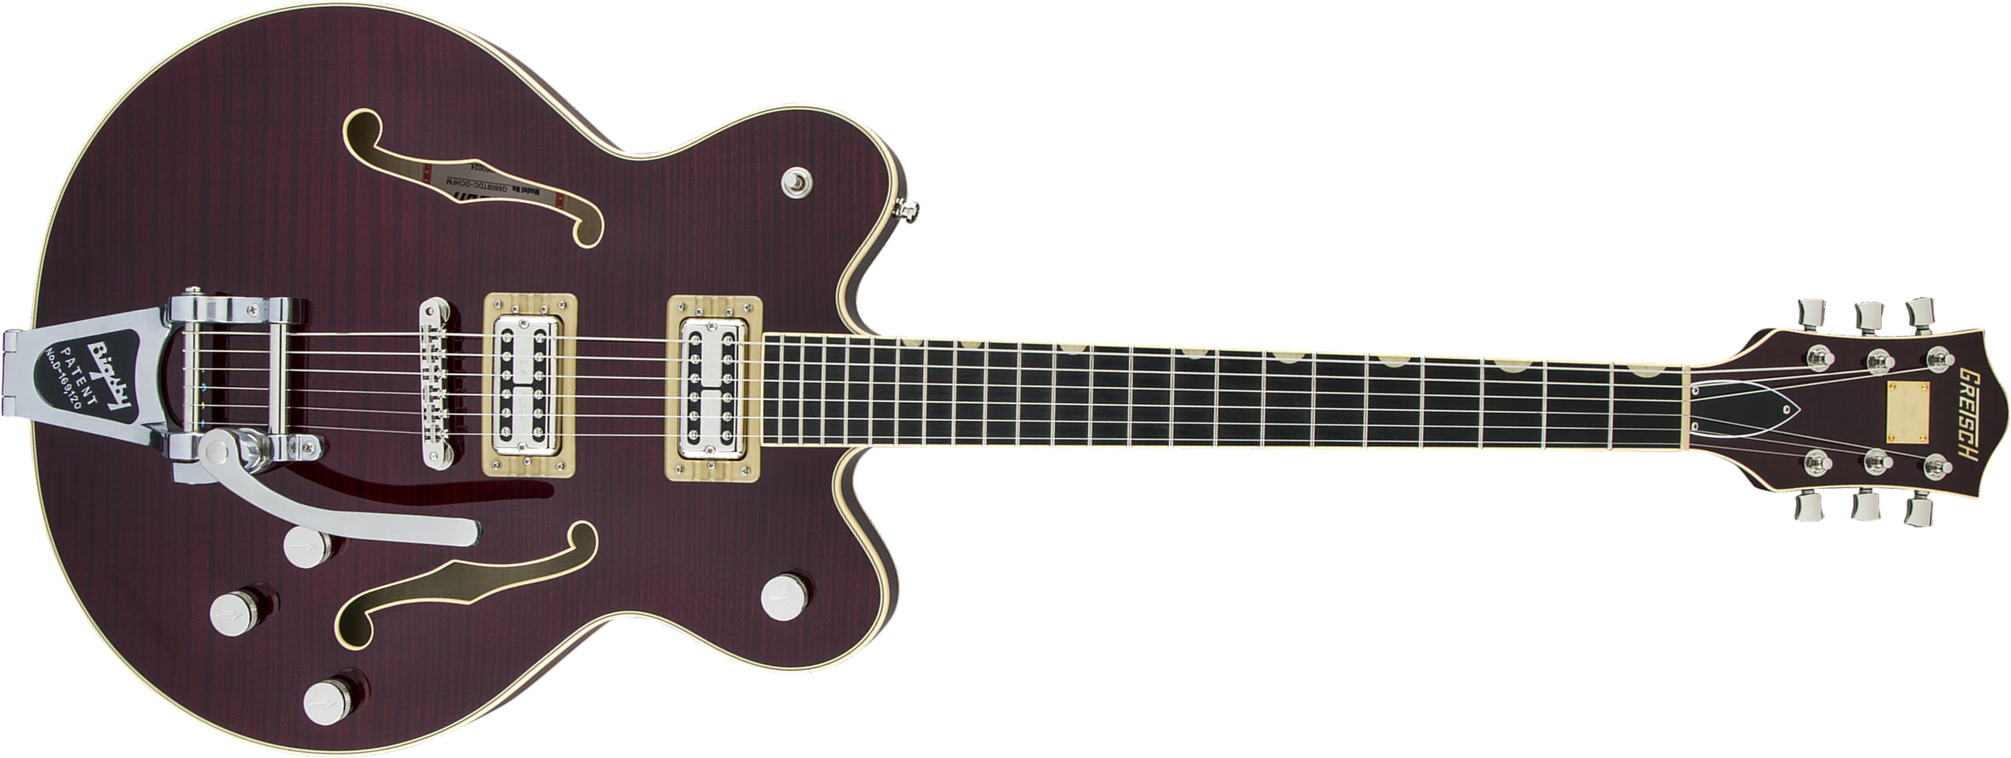 Gretsch G6609tfm Broadkaster Center Bloc Dc Players Edition Pro Jap Bigsby Eb - Dark Cherry Stain - Guitarra eléctrica semi caja - Main picture